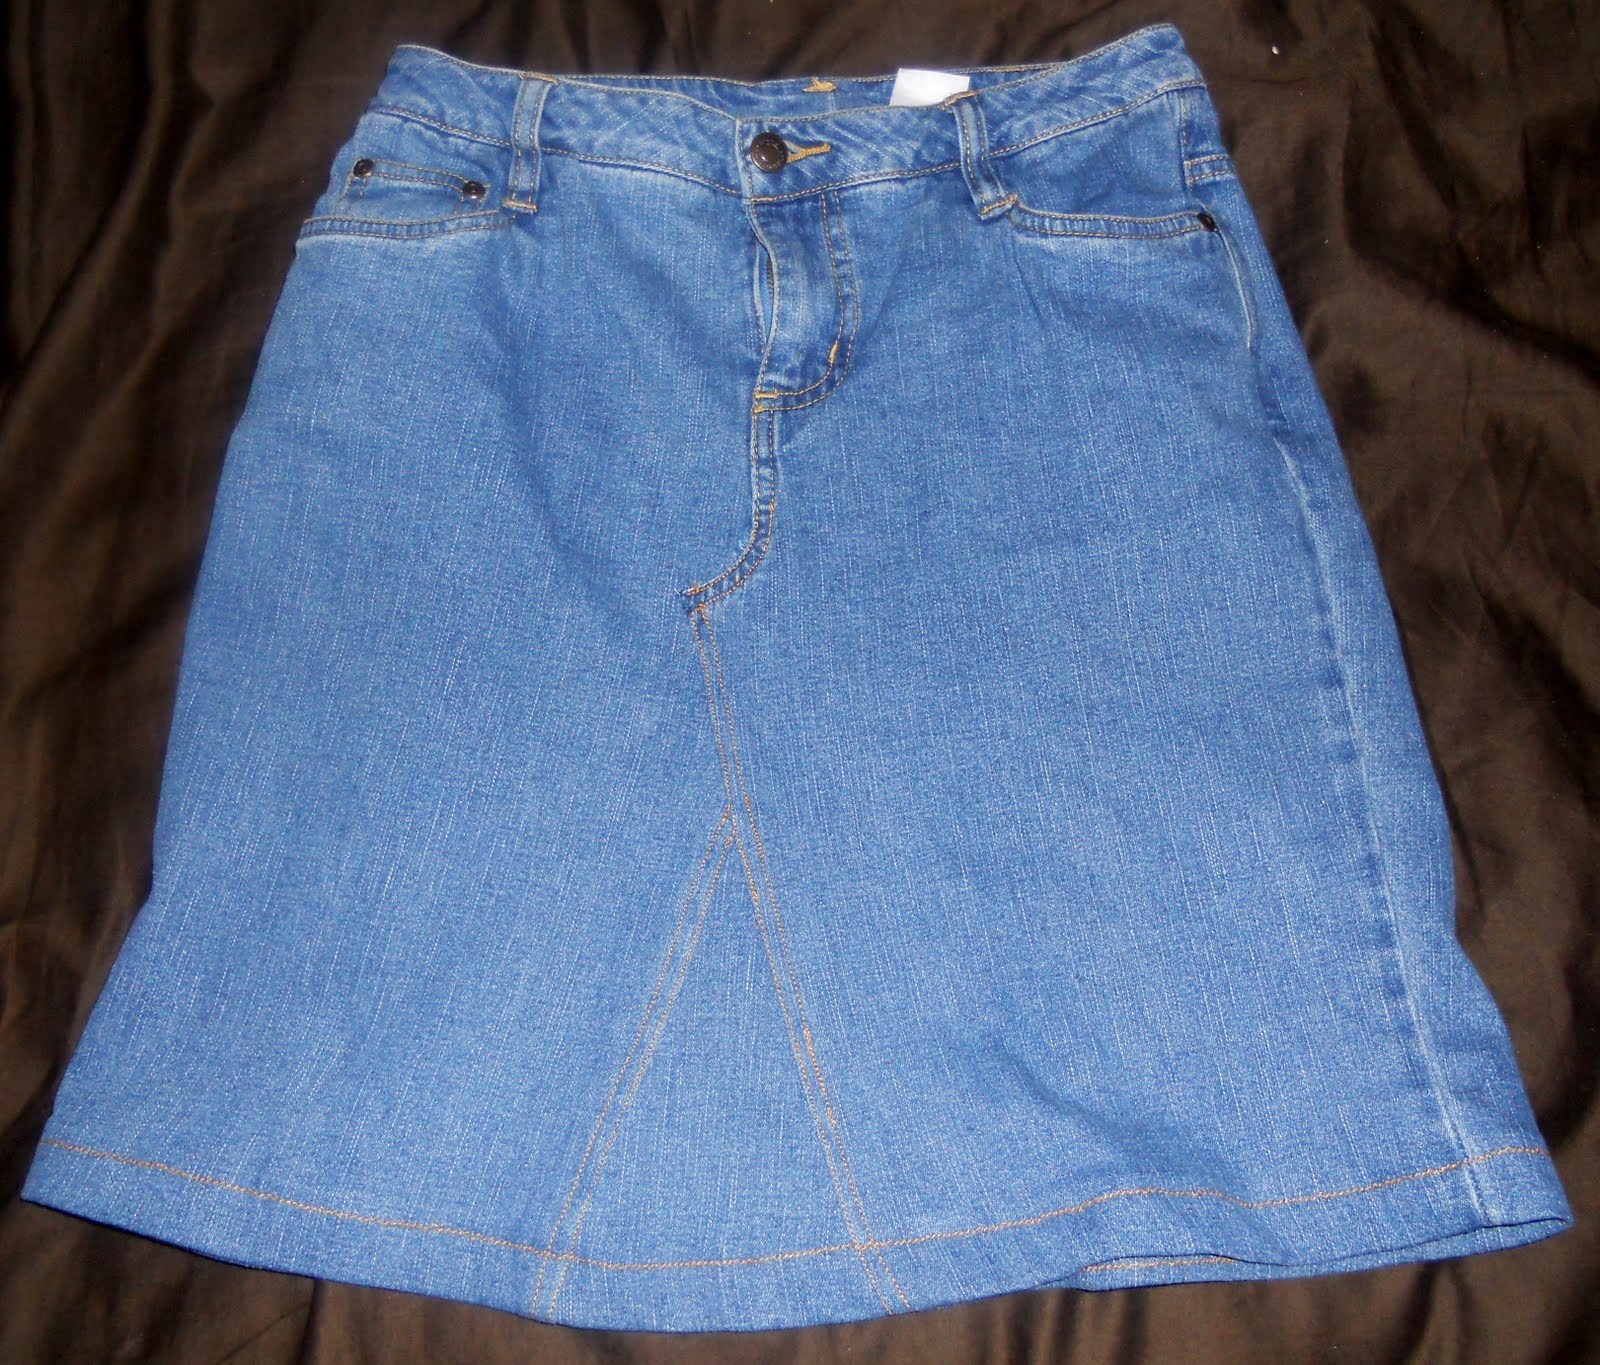 Life of the Crazy Bakers: Old Jeans into New Skirt